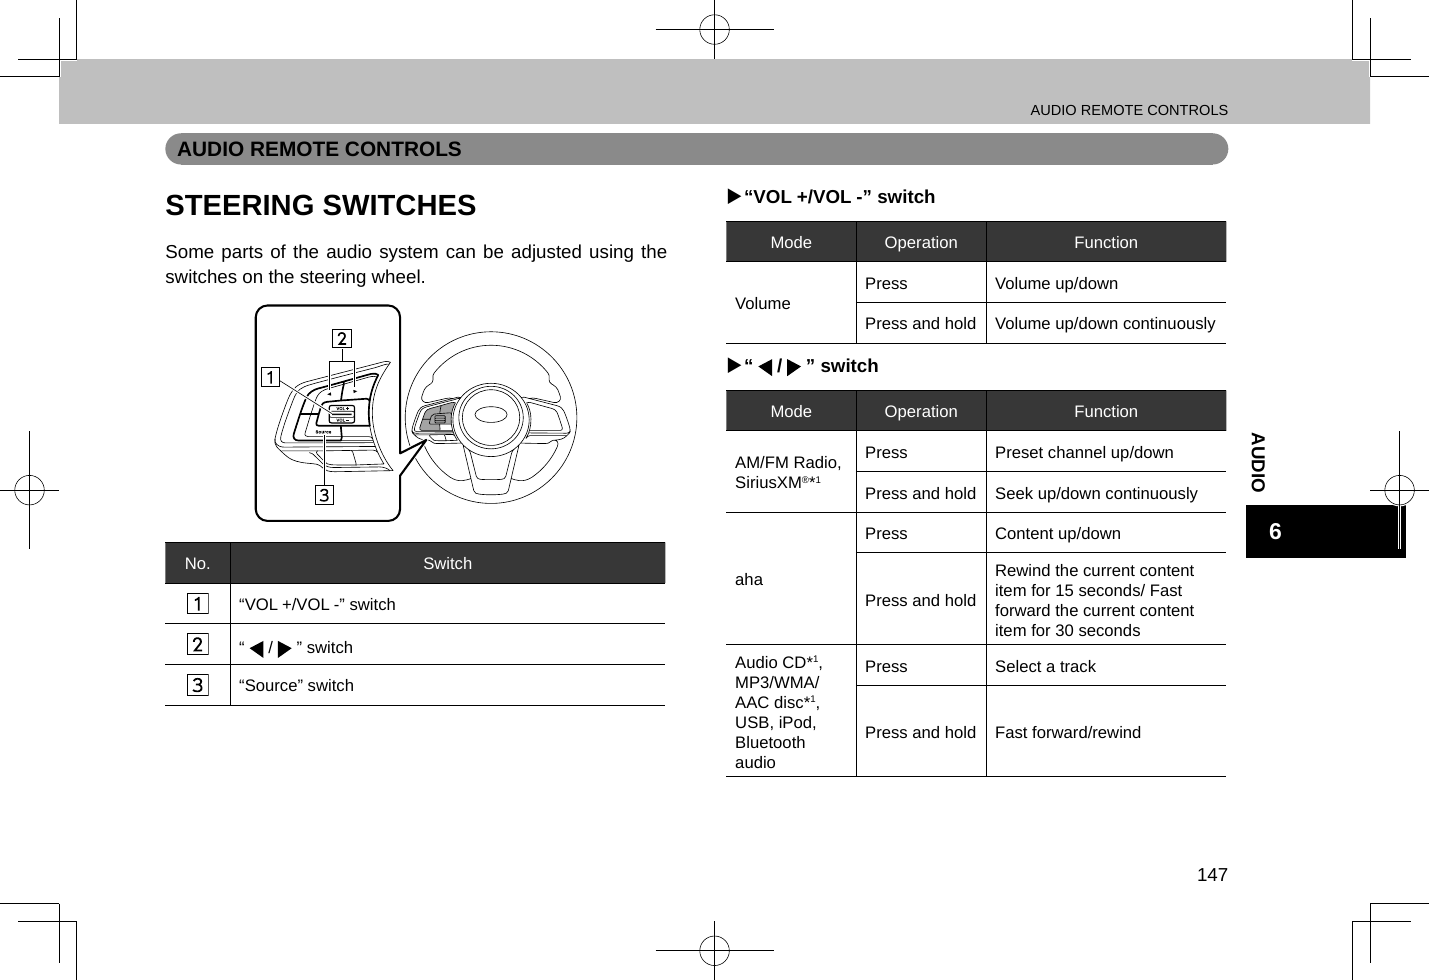 Page 148 of Harman BE2818 Automotive Infotainment Unit with Bluetooth User Manual 